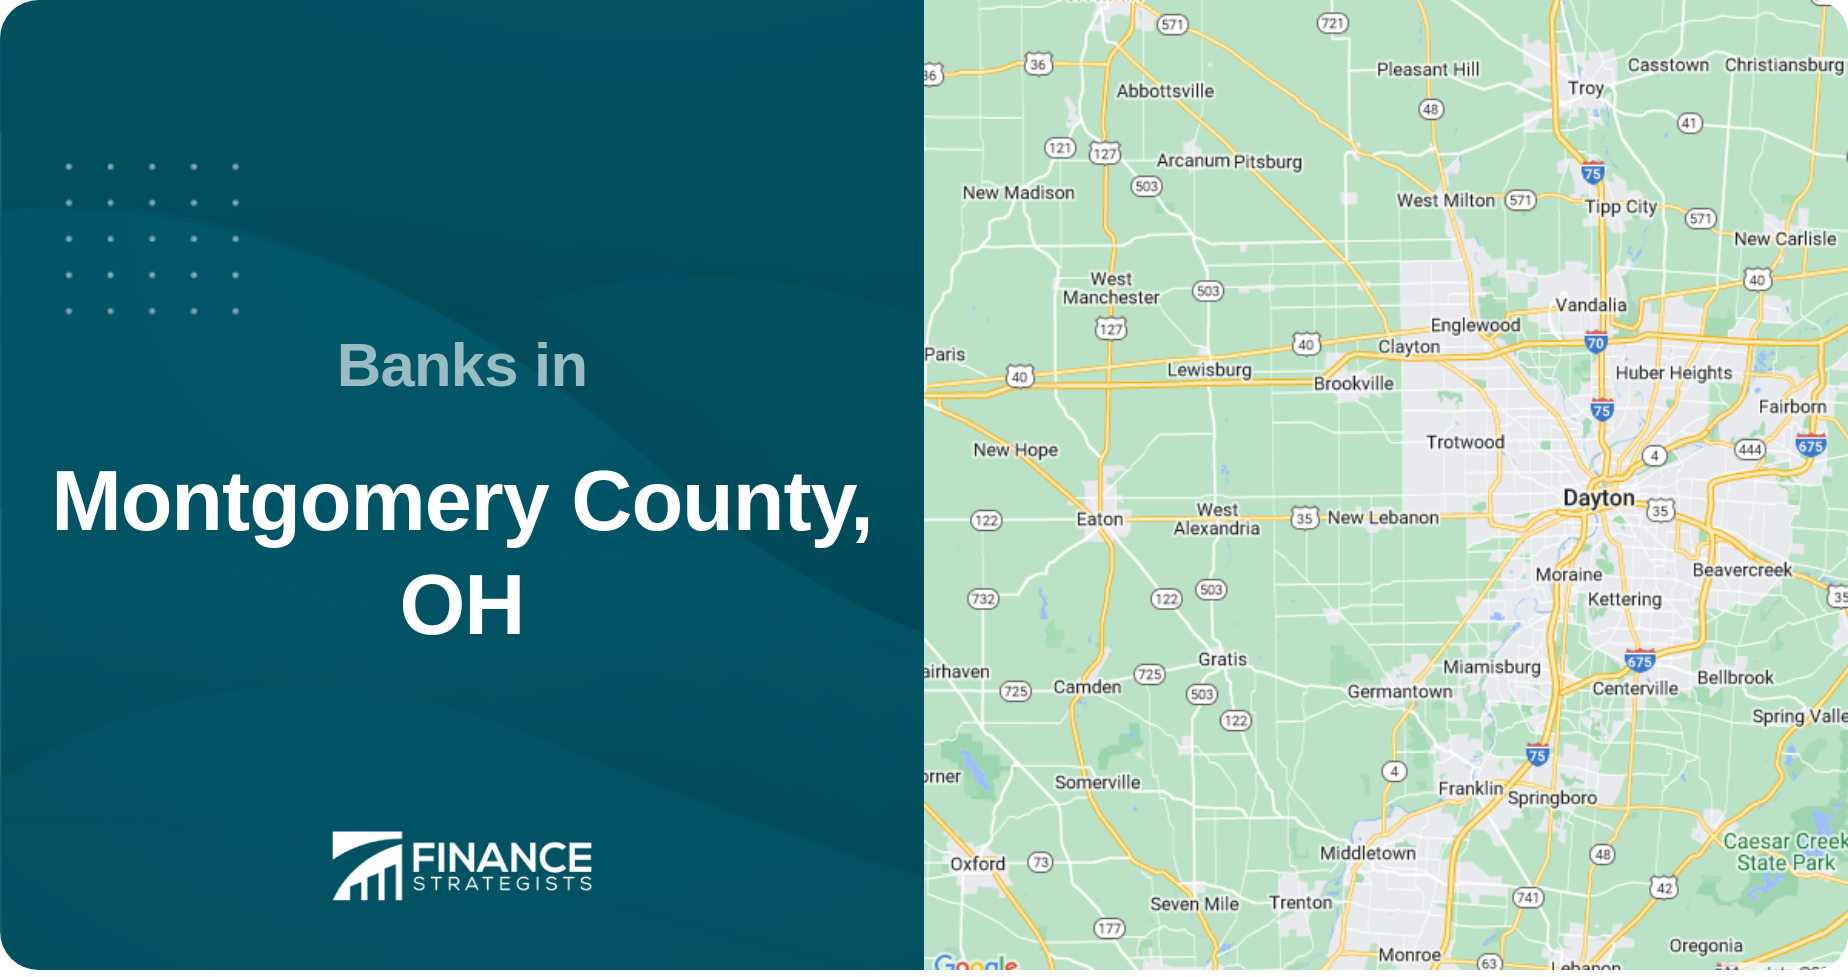 Banks in Montgomery County, OH